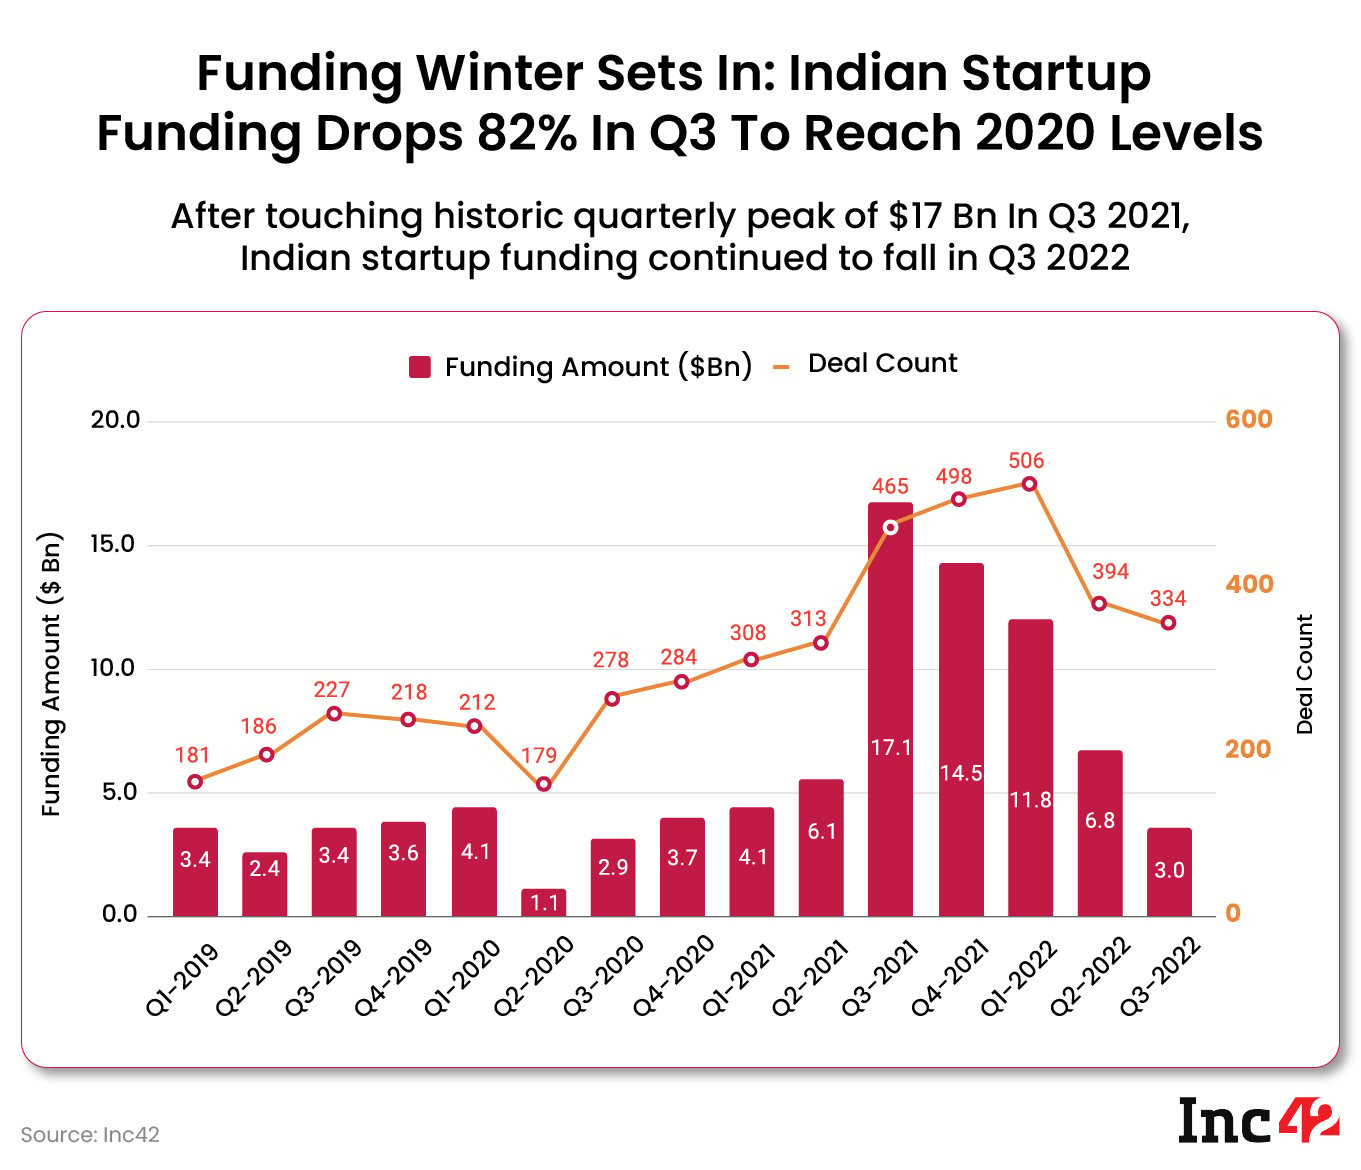 Funding winter sets in Indian startup ecosystem